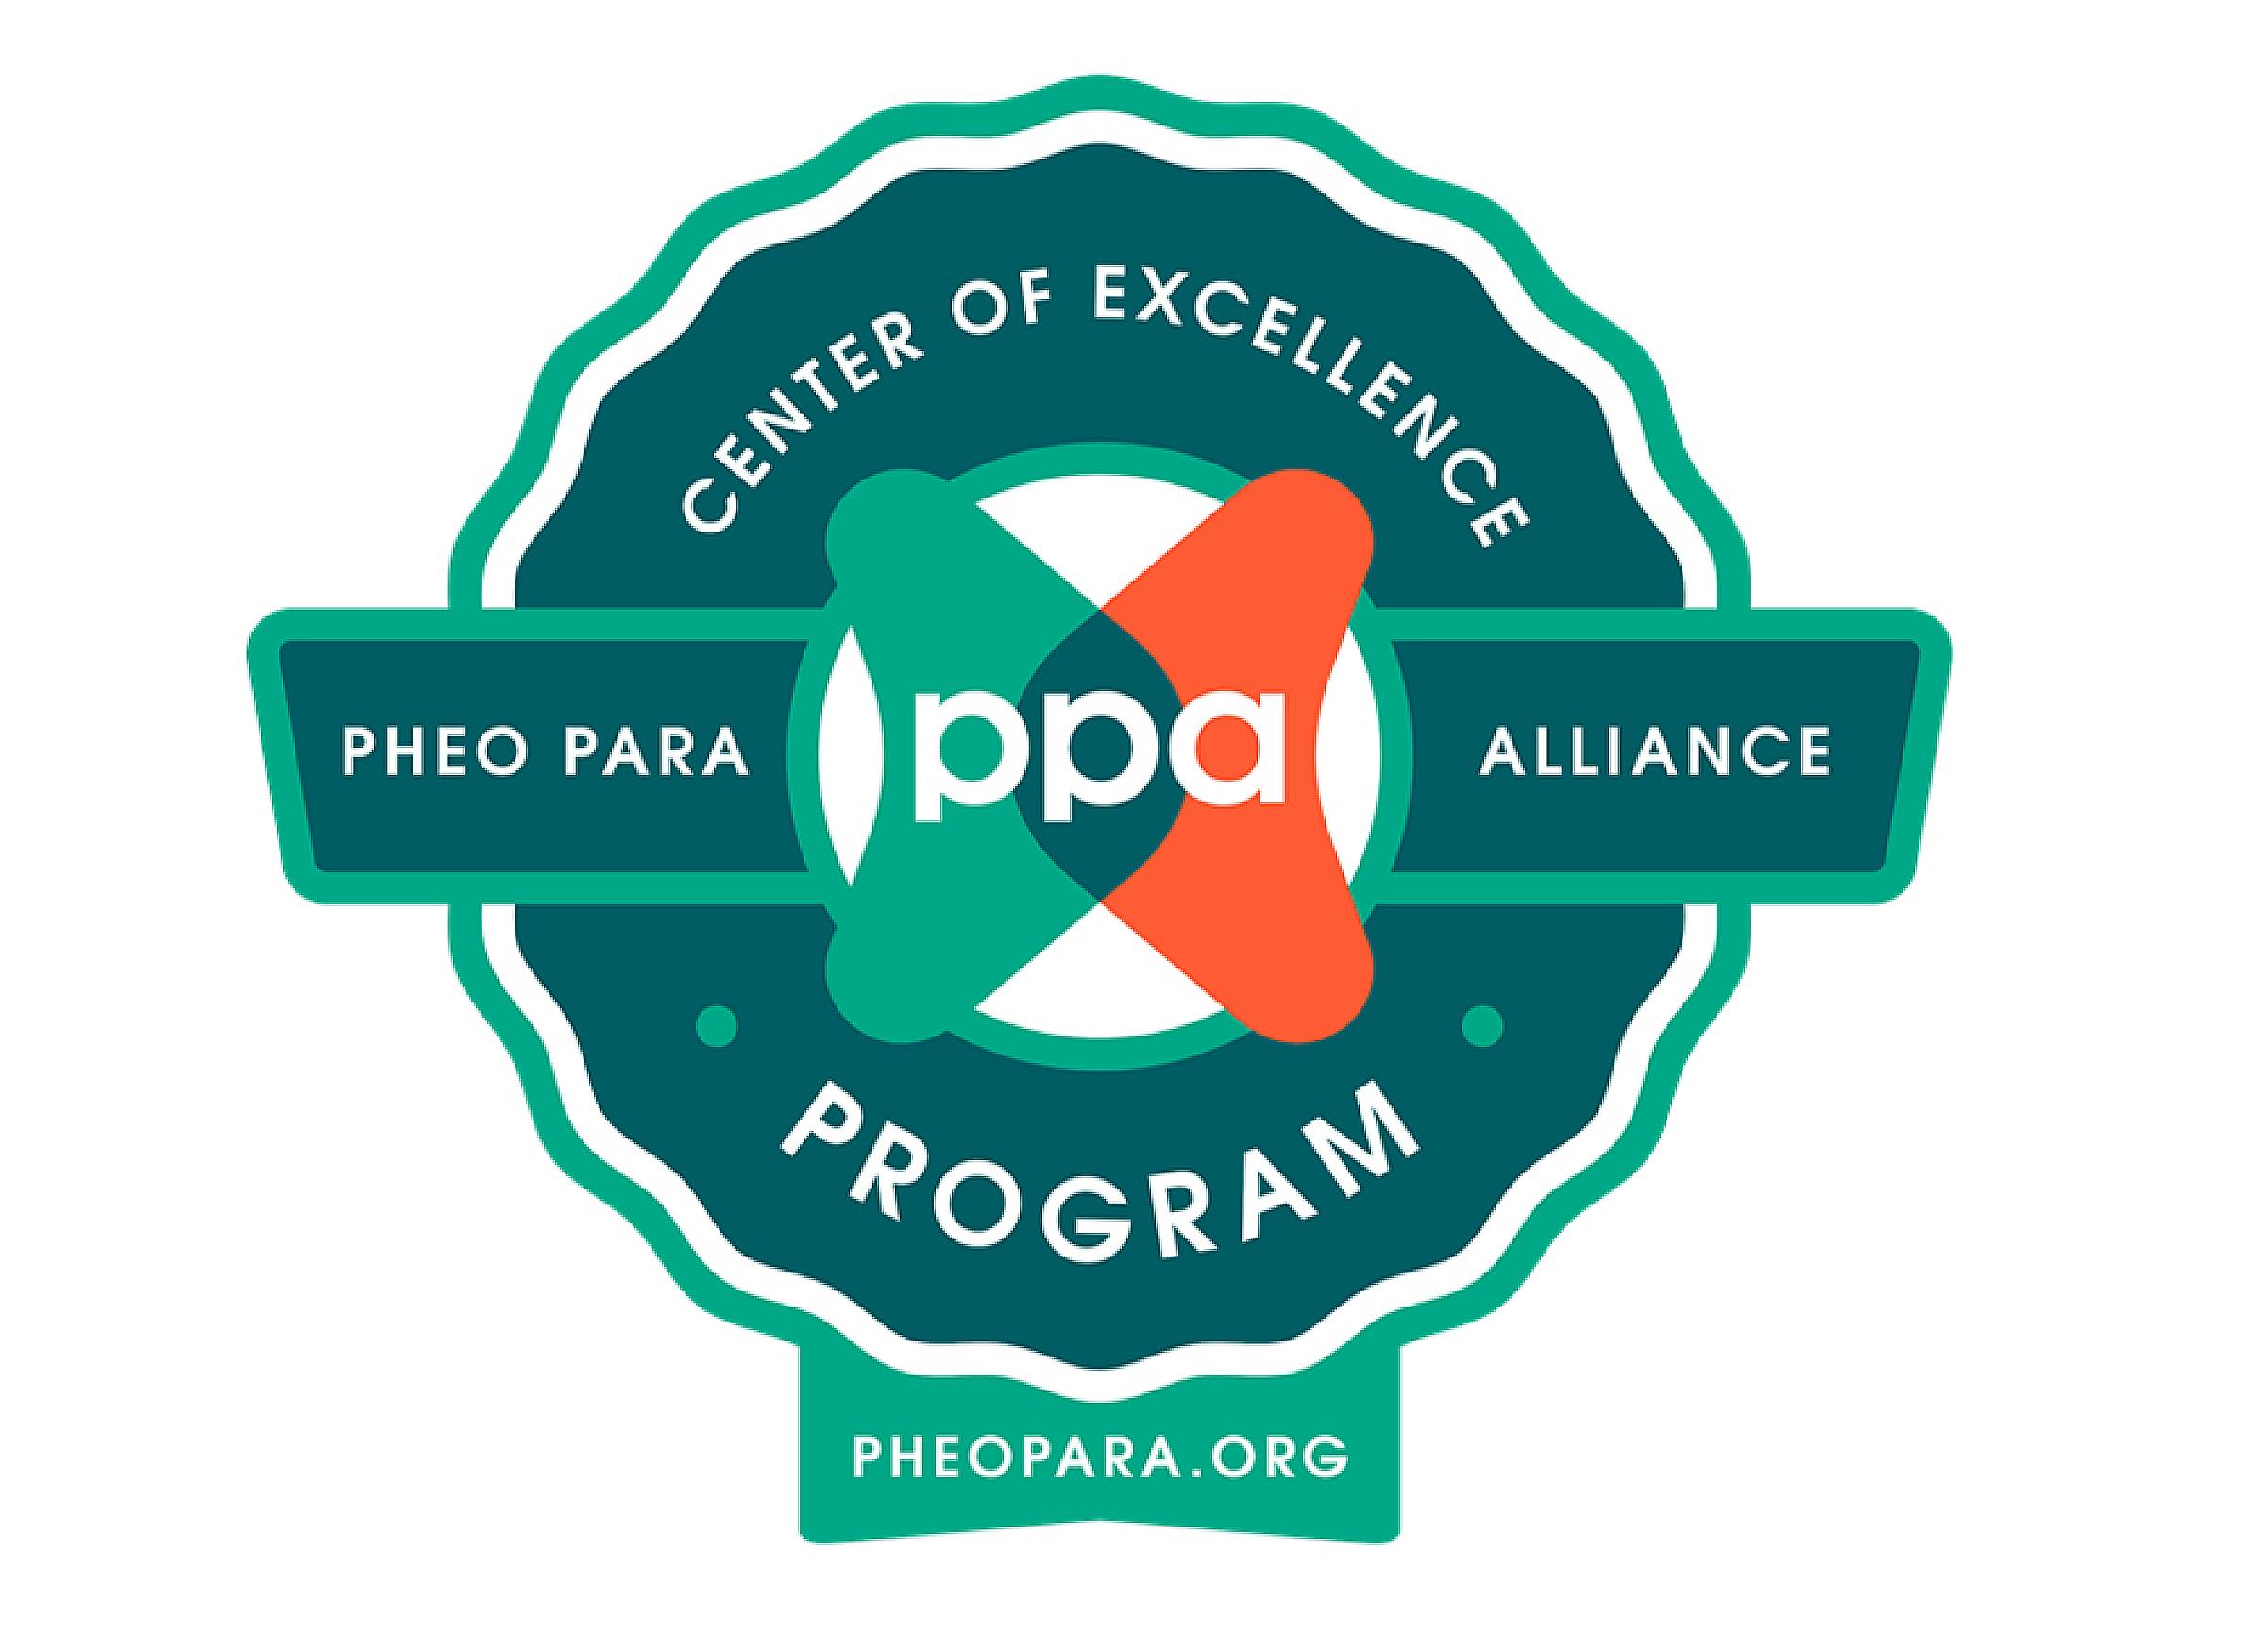 Pheo Parma Alliance Center of Excellence logo